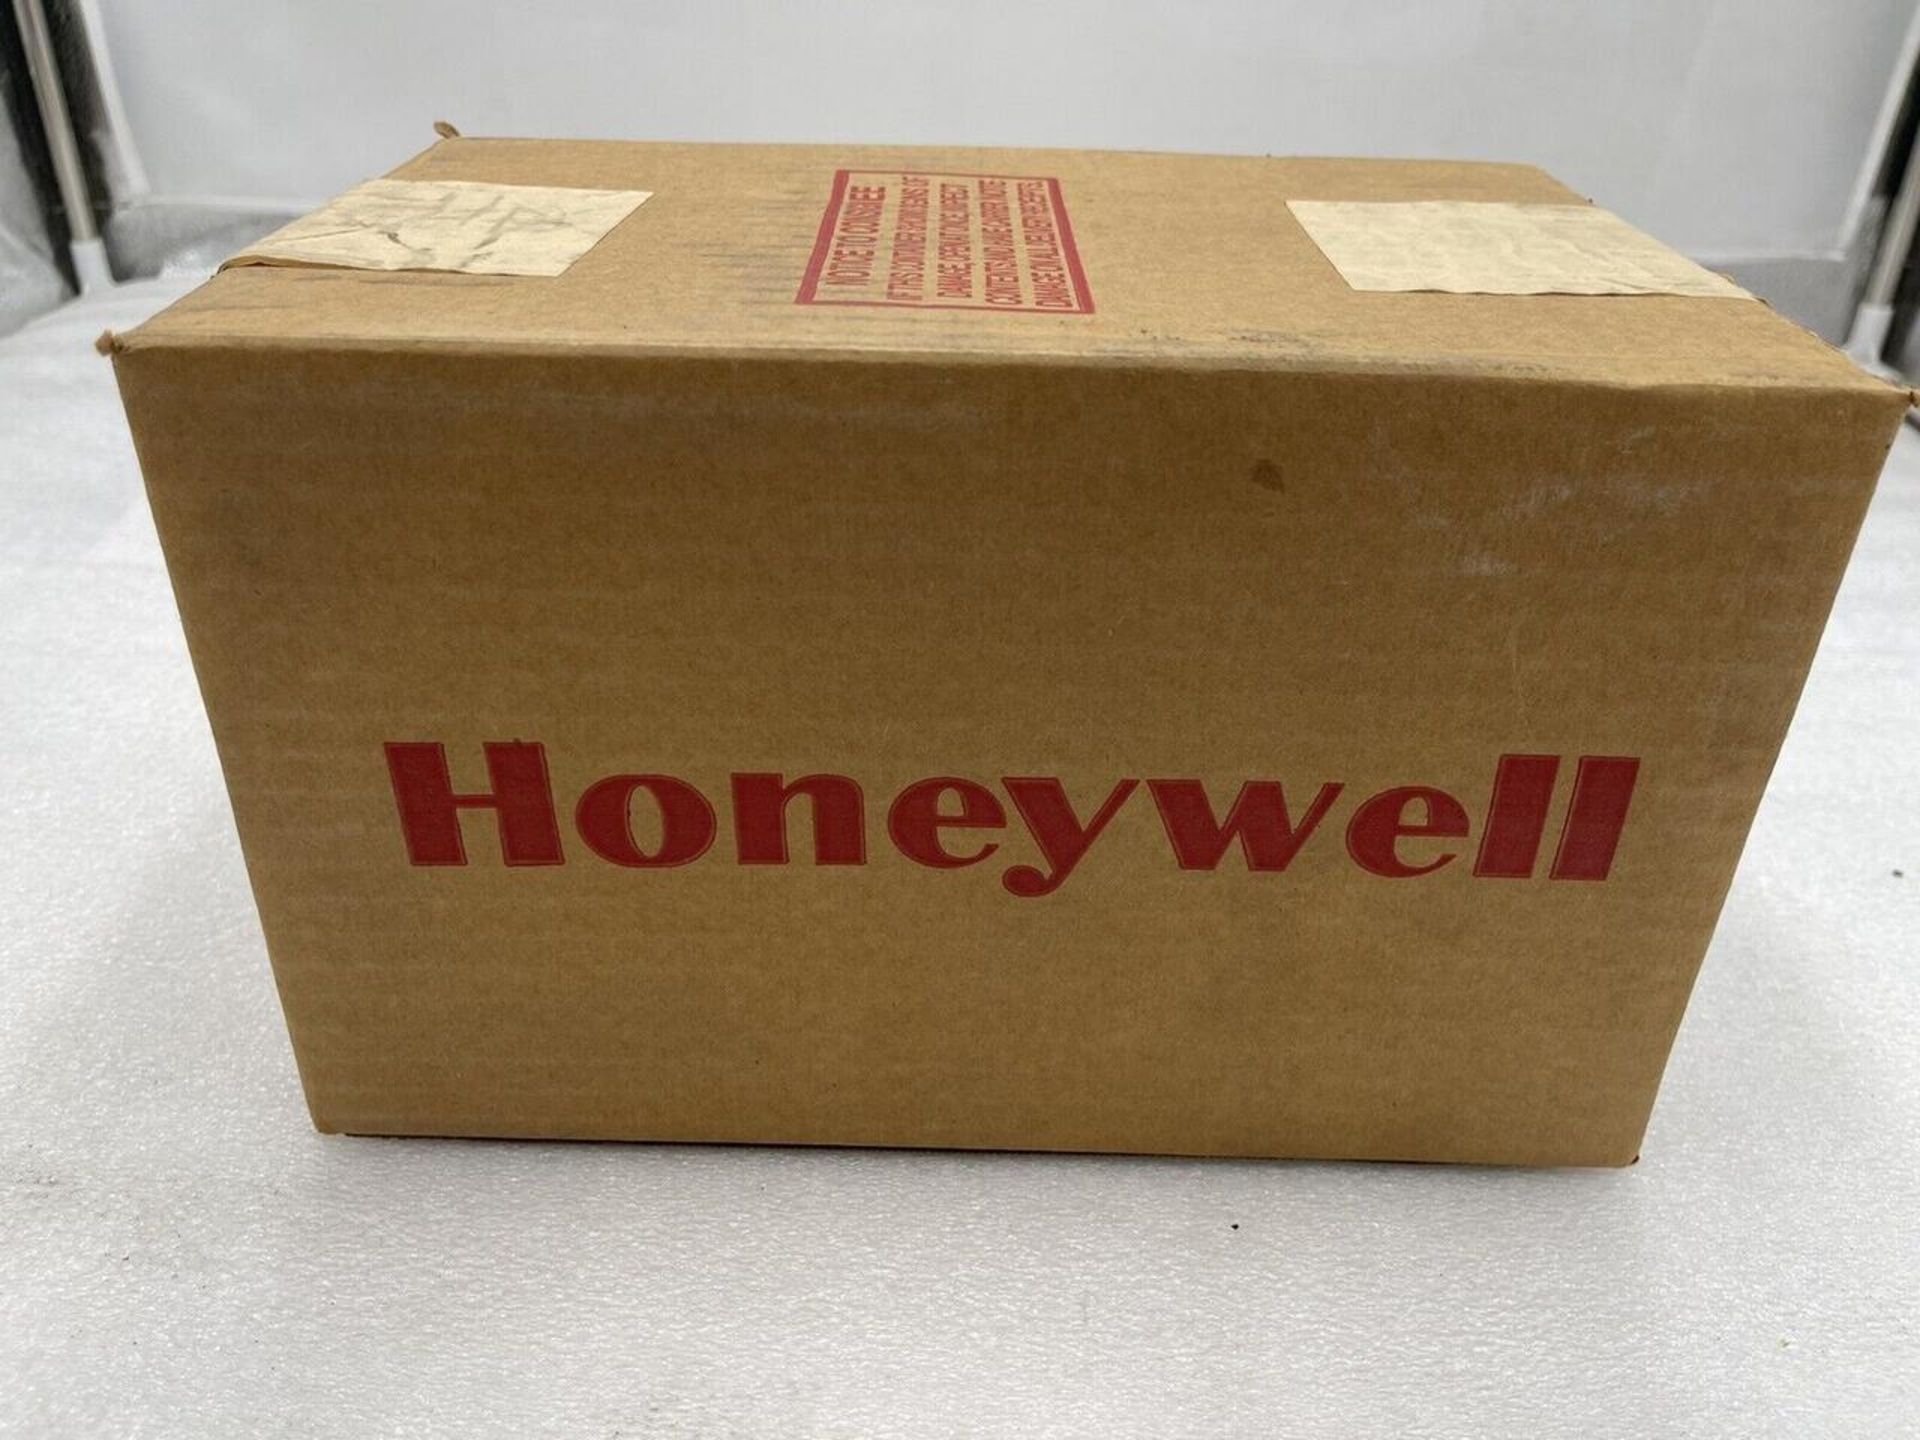 NEW Honeywell C7061A1012 UV Flame Detector C7061A1012 - Image 3 of 3